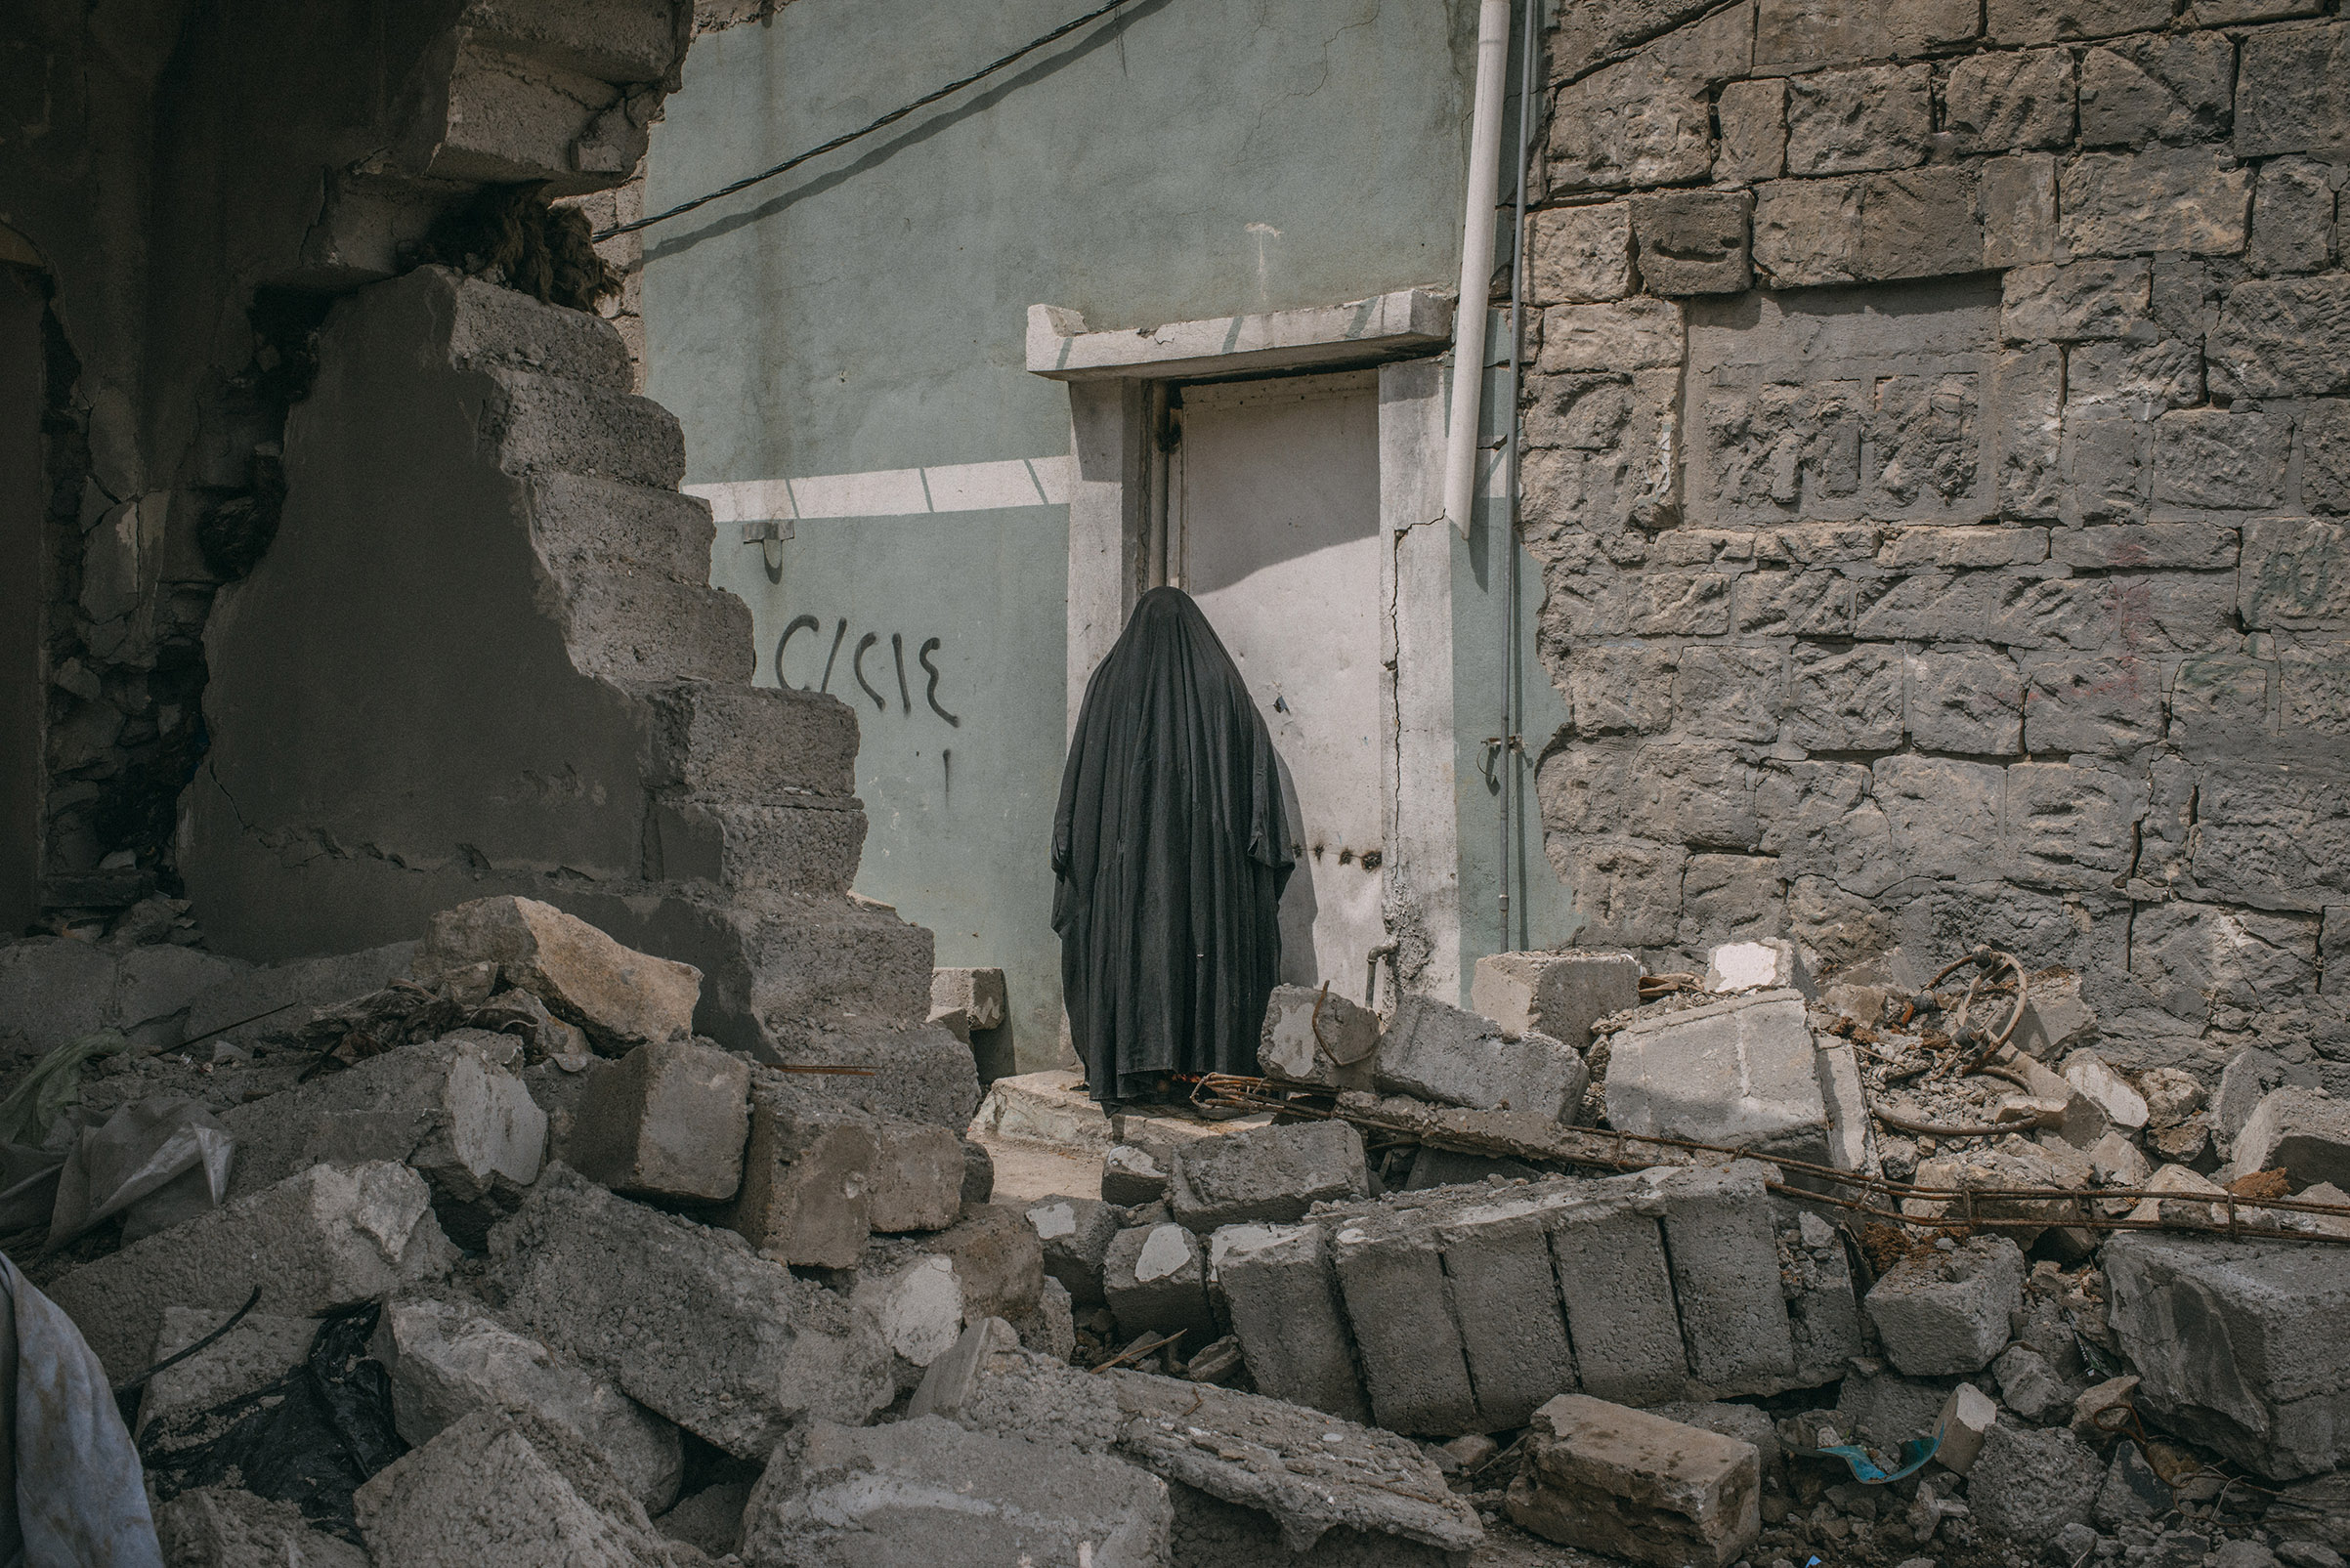 A woman stands among buildings damaged by airstrikes in southwest Mosul on April 3, 2017 (Emanuele Satolli for TIME)